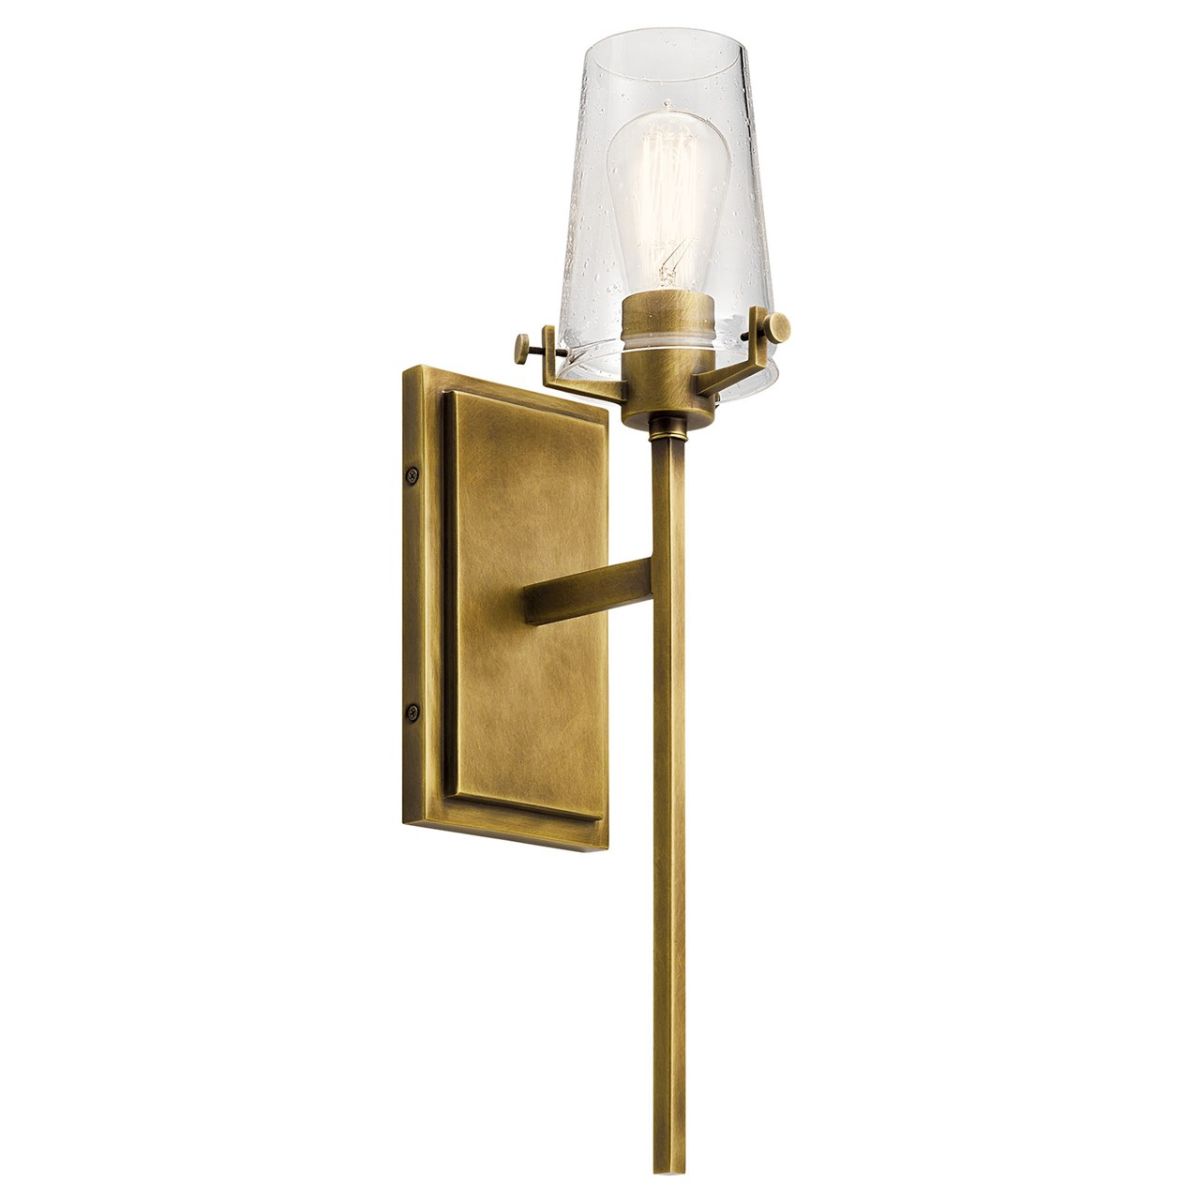 Alton 22 in. Armed Sconce